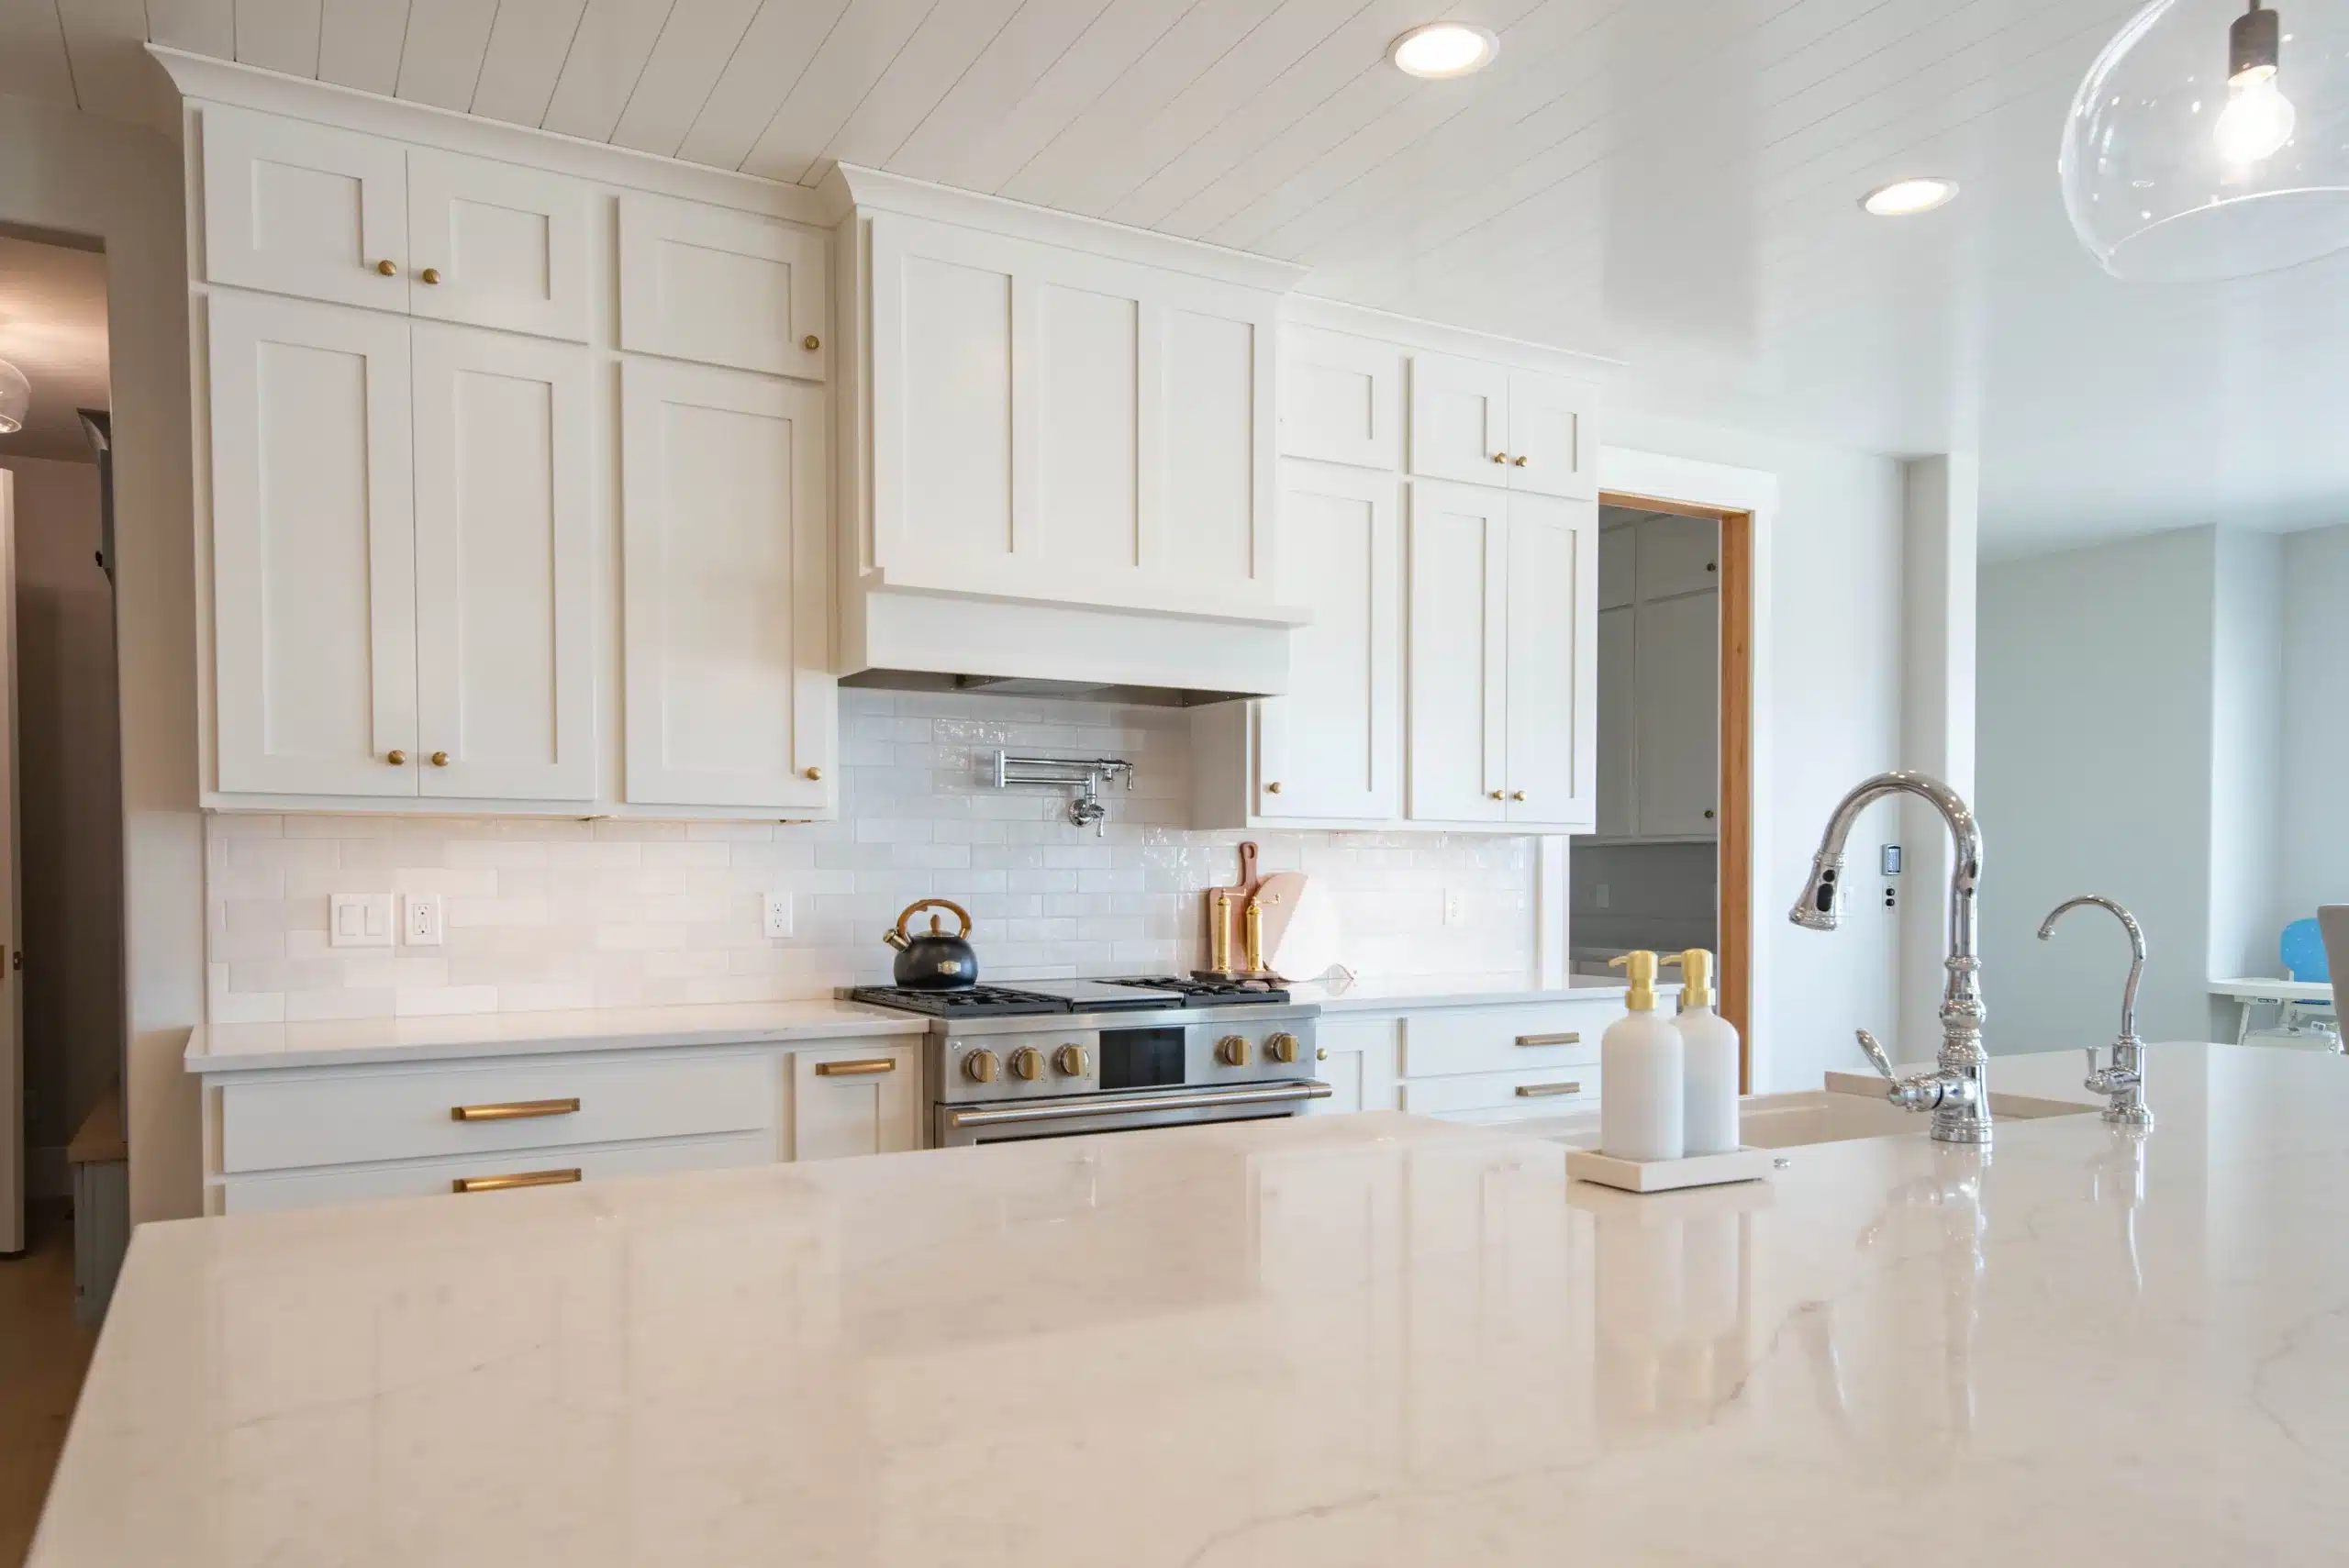 Kitchen Cabinets and Countertops in West Layton, UT